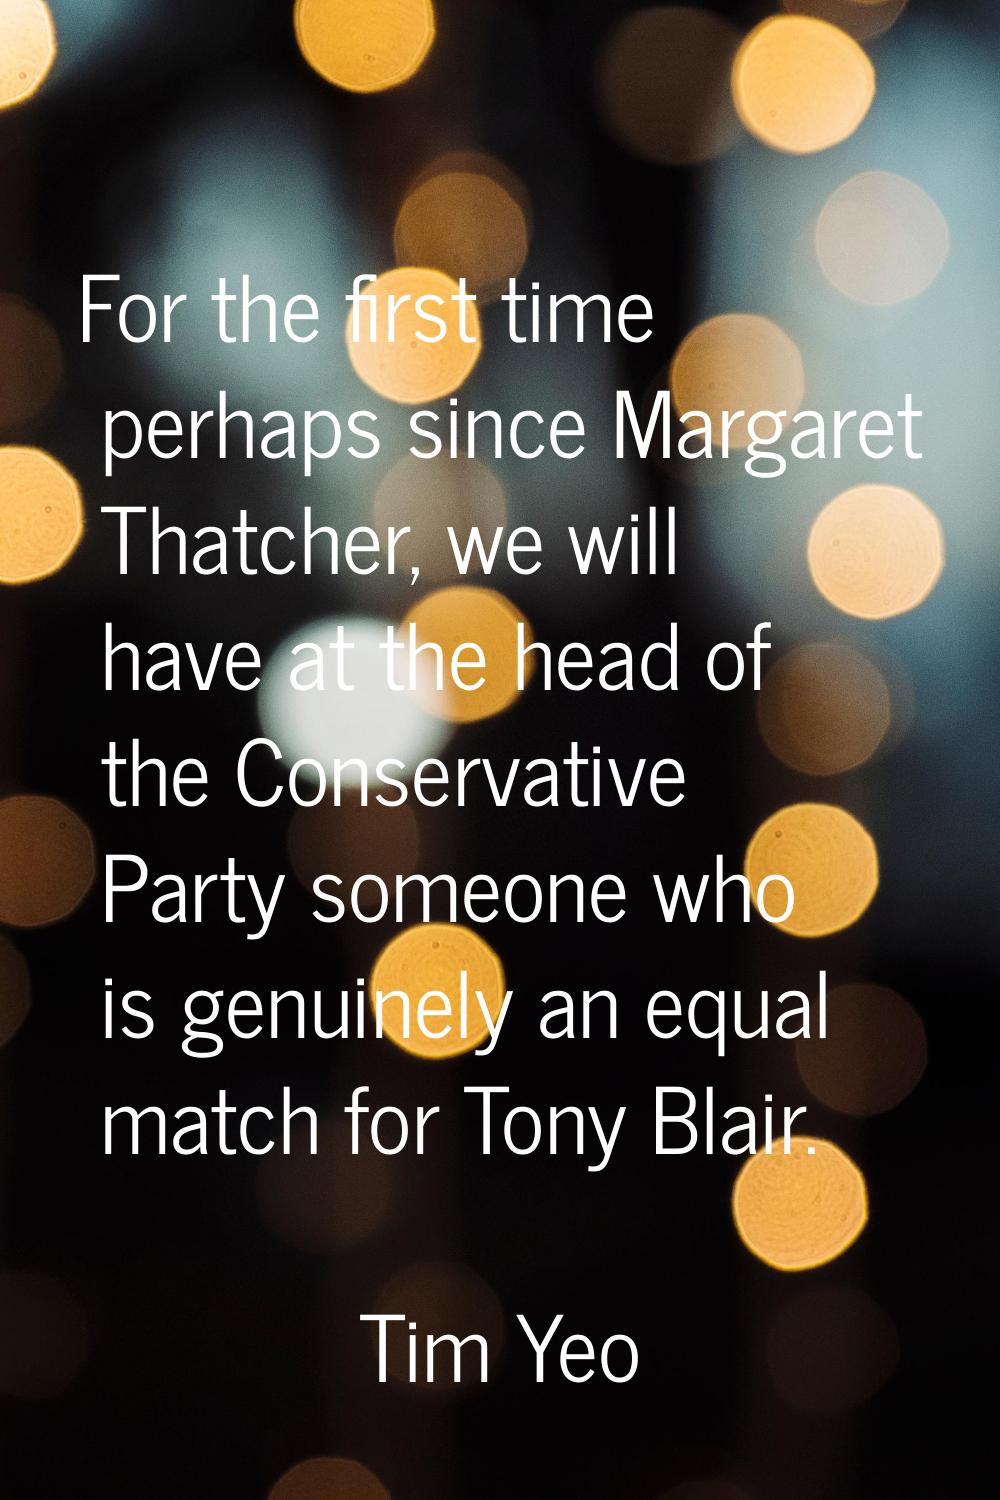 For the first time perhaps since Margaret Thatcher, we will have at the head of the Conservative Pa